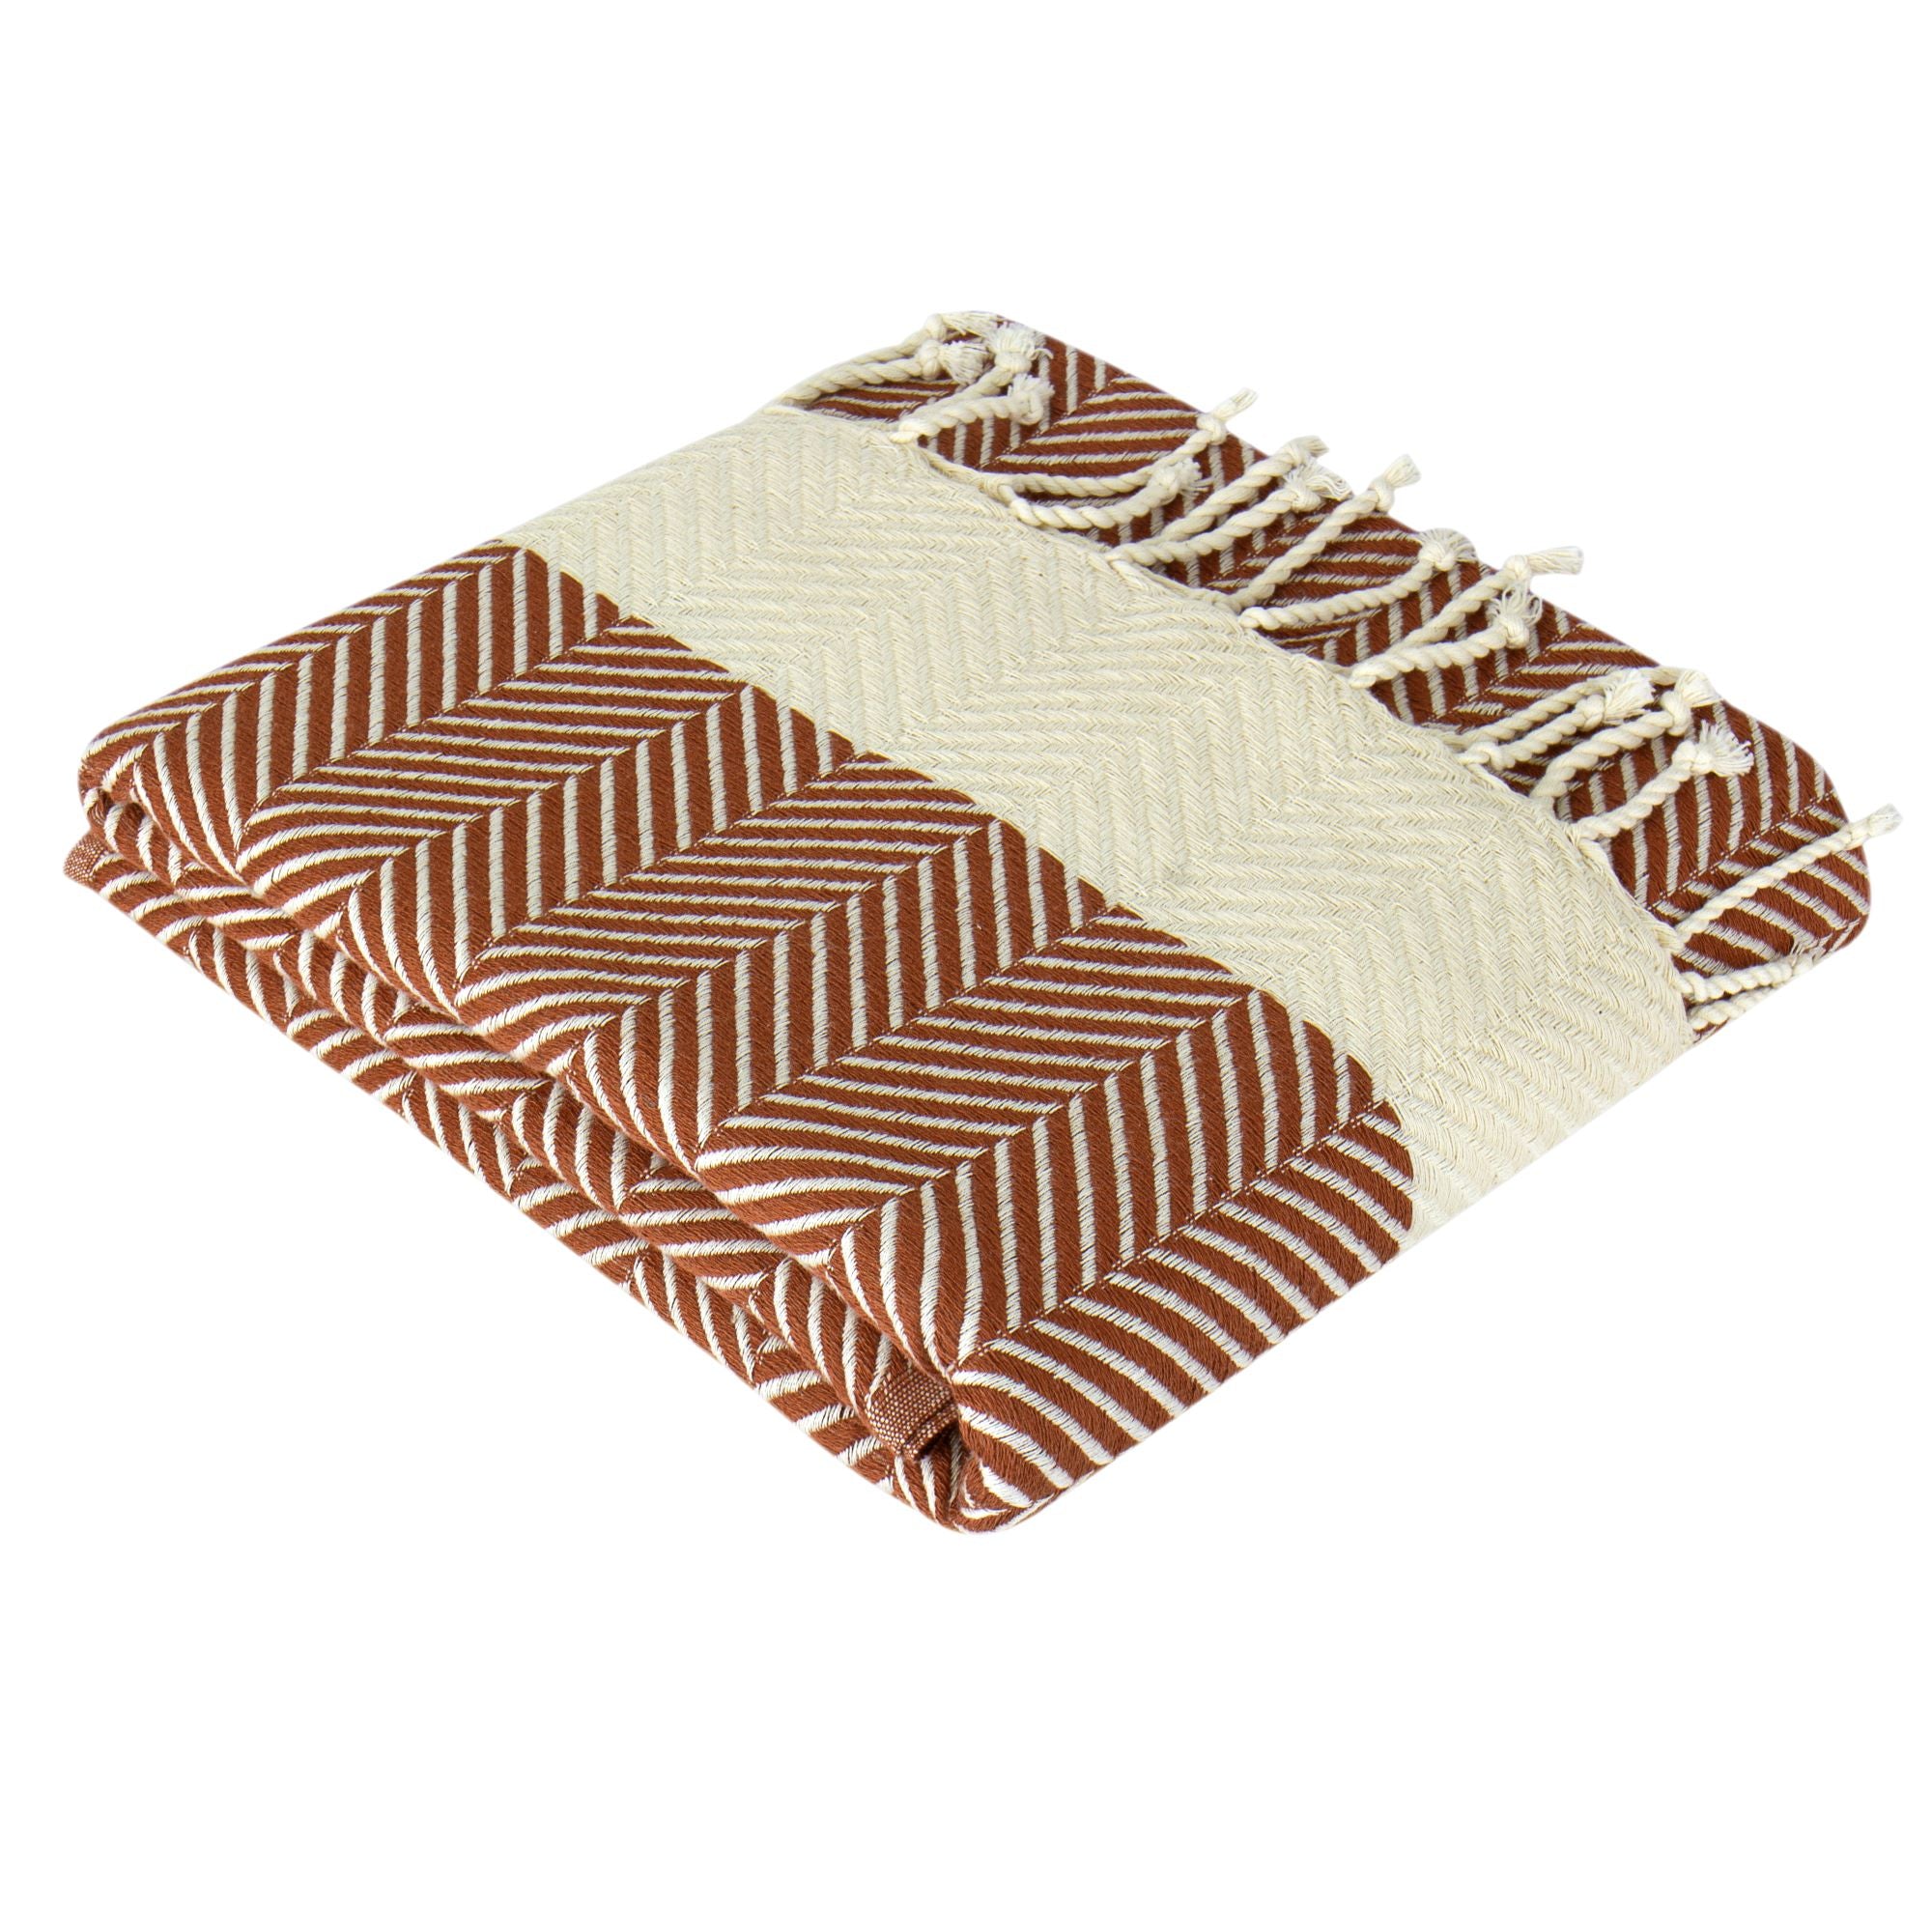 Image of the Hiera Extra Long Turkish Hammam towel. The towel displays a rich color and a distinctive herringbone pattern, hinting at its versatility as a beach or bathroom towel, pool cover, sofa cover, couch throw, and shawl. Its luxurious, quick-drying Turkish Cotton material is subtly showcased.